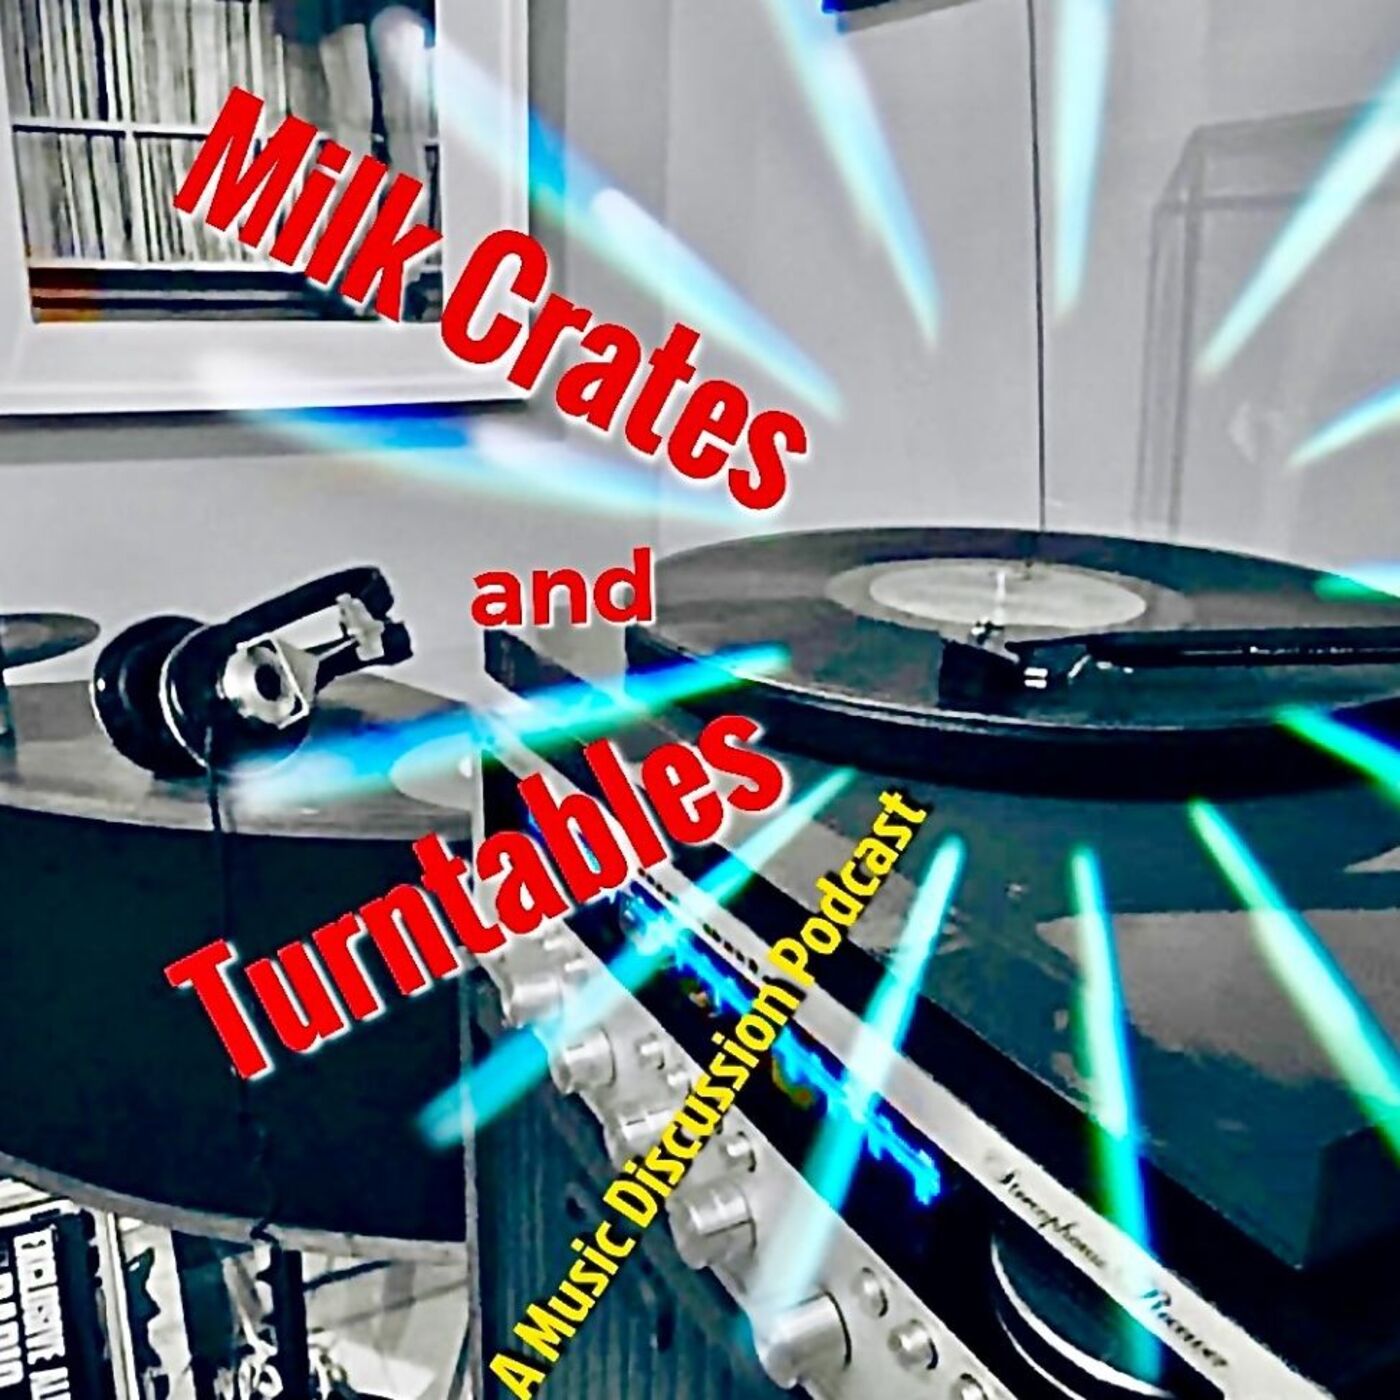 Fresh update on "barney" discussed on Milk Crates and Turntables. A Music Discussion Podcast